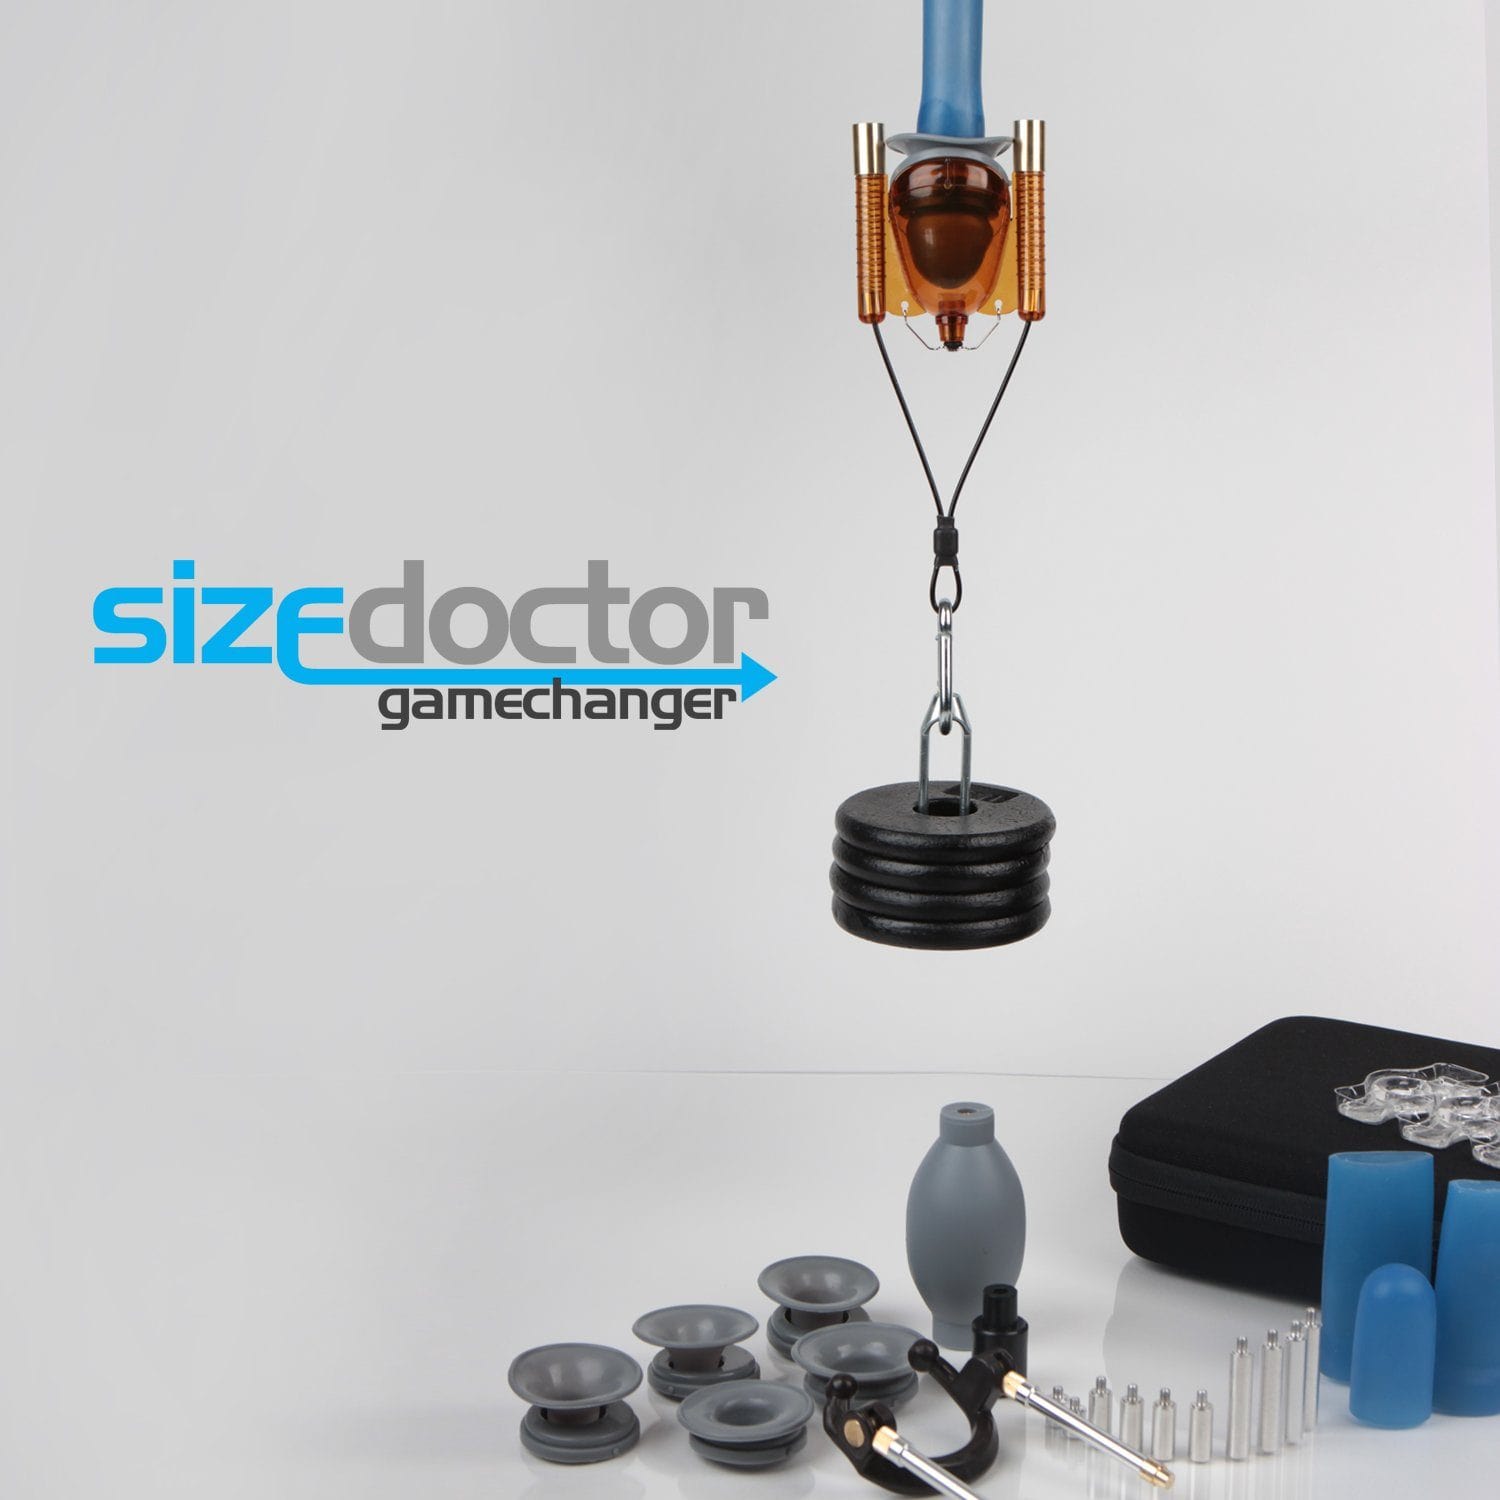 SizeDoctor GameChanger - Penis Vacuum Traction Stretcher - Weight Hanging